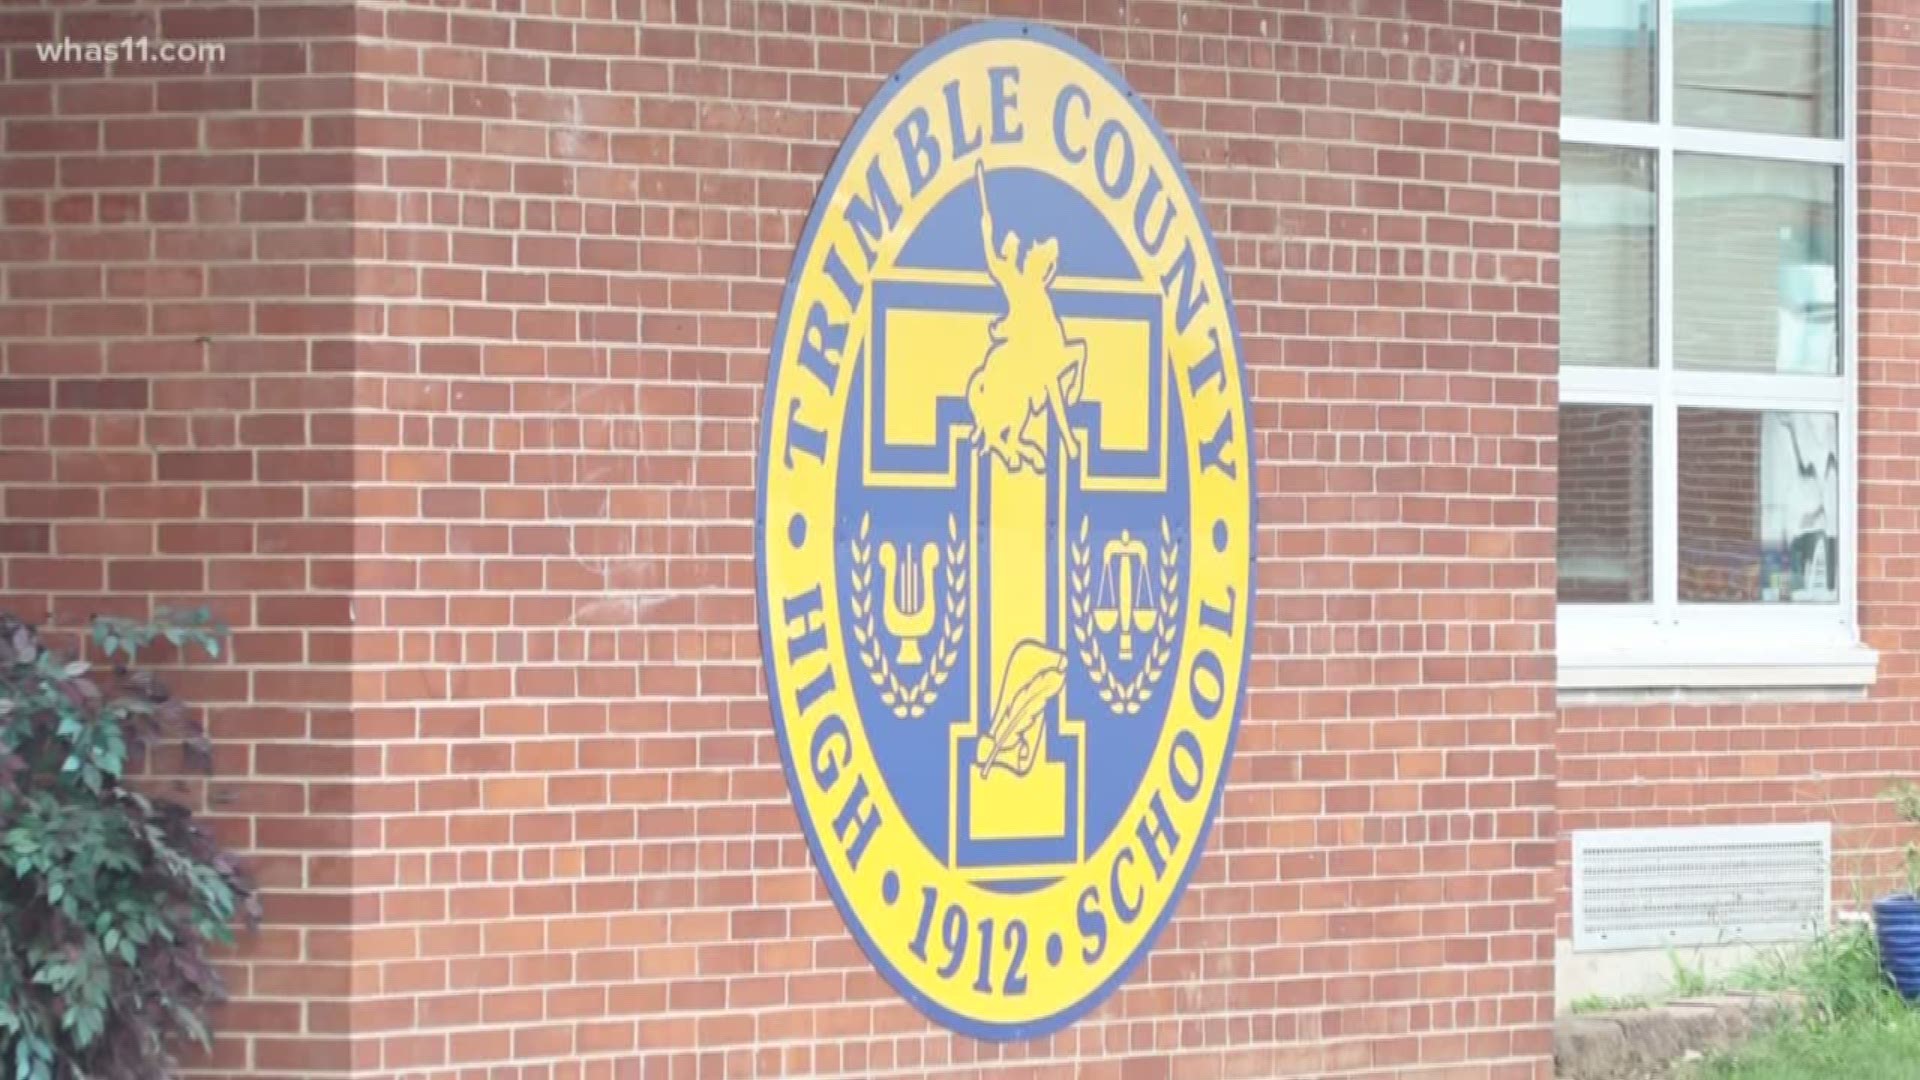 With only 20 kids showing up for football practice on Aug. 6, the superintendent of Trimble County Schools said he has no choice, there will be no football this fall.